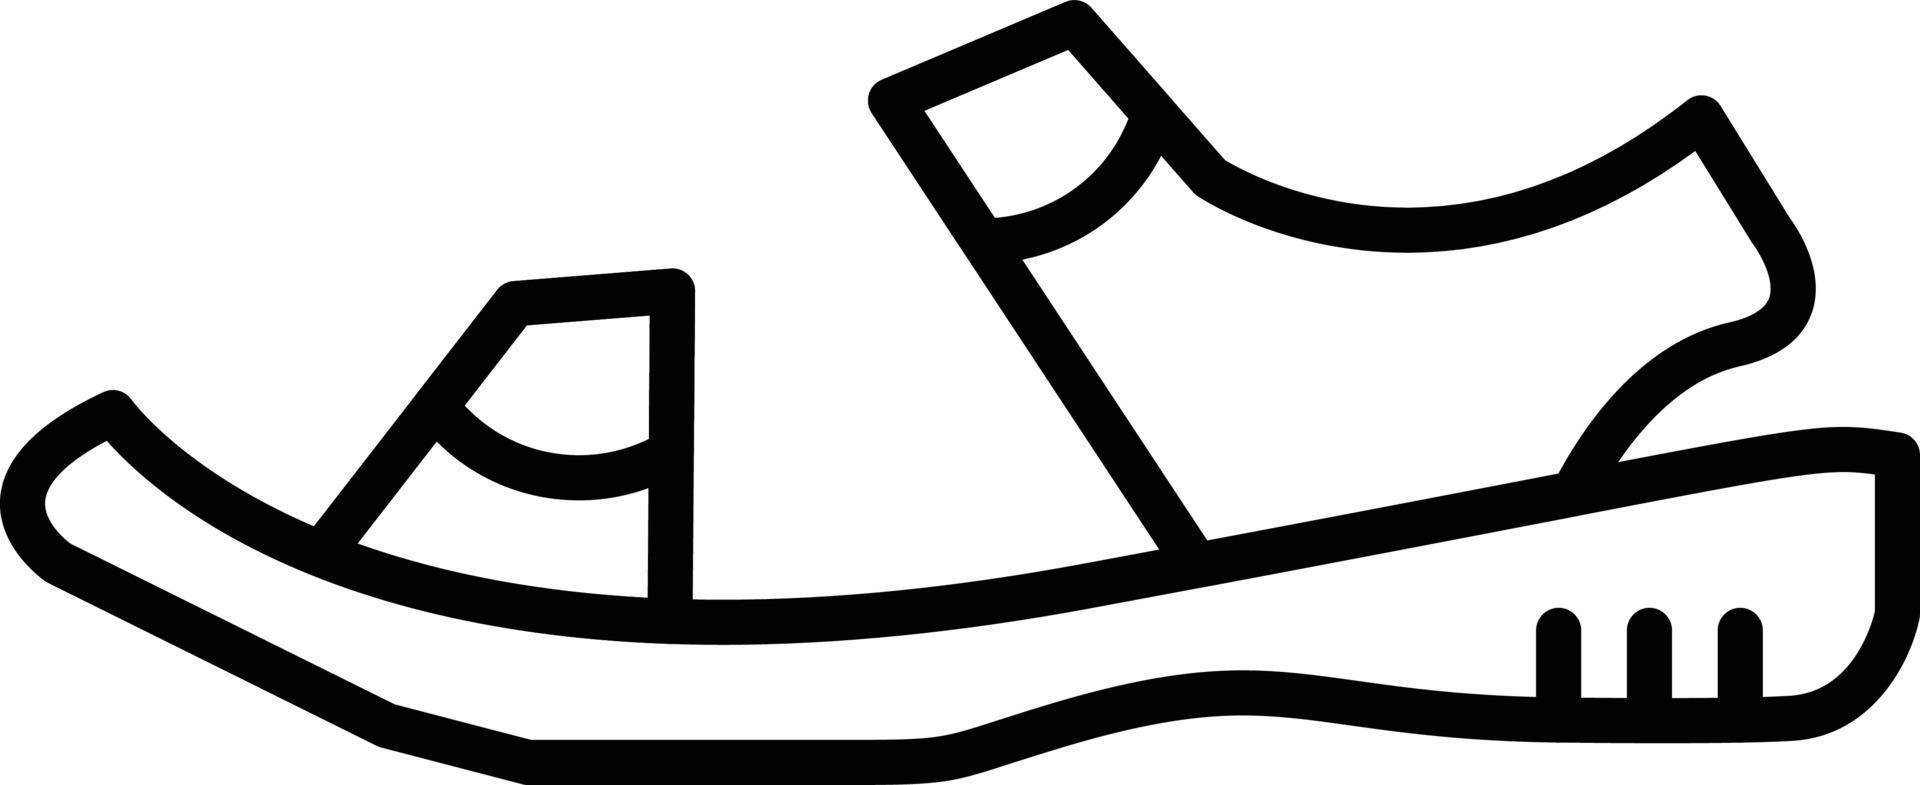 Sandal Outline Icon vector